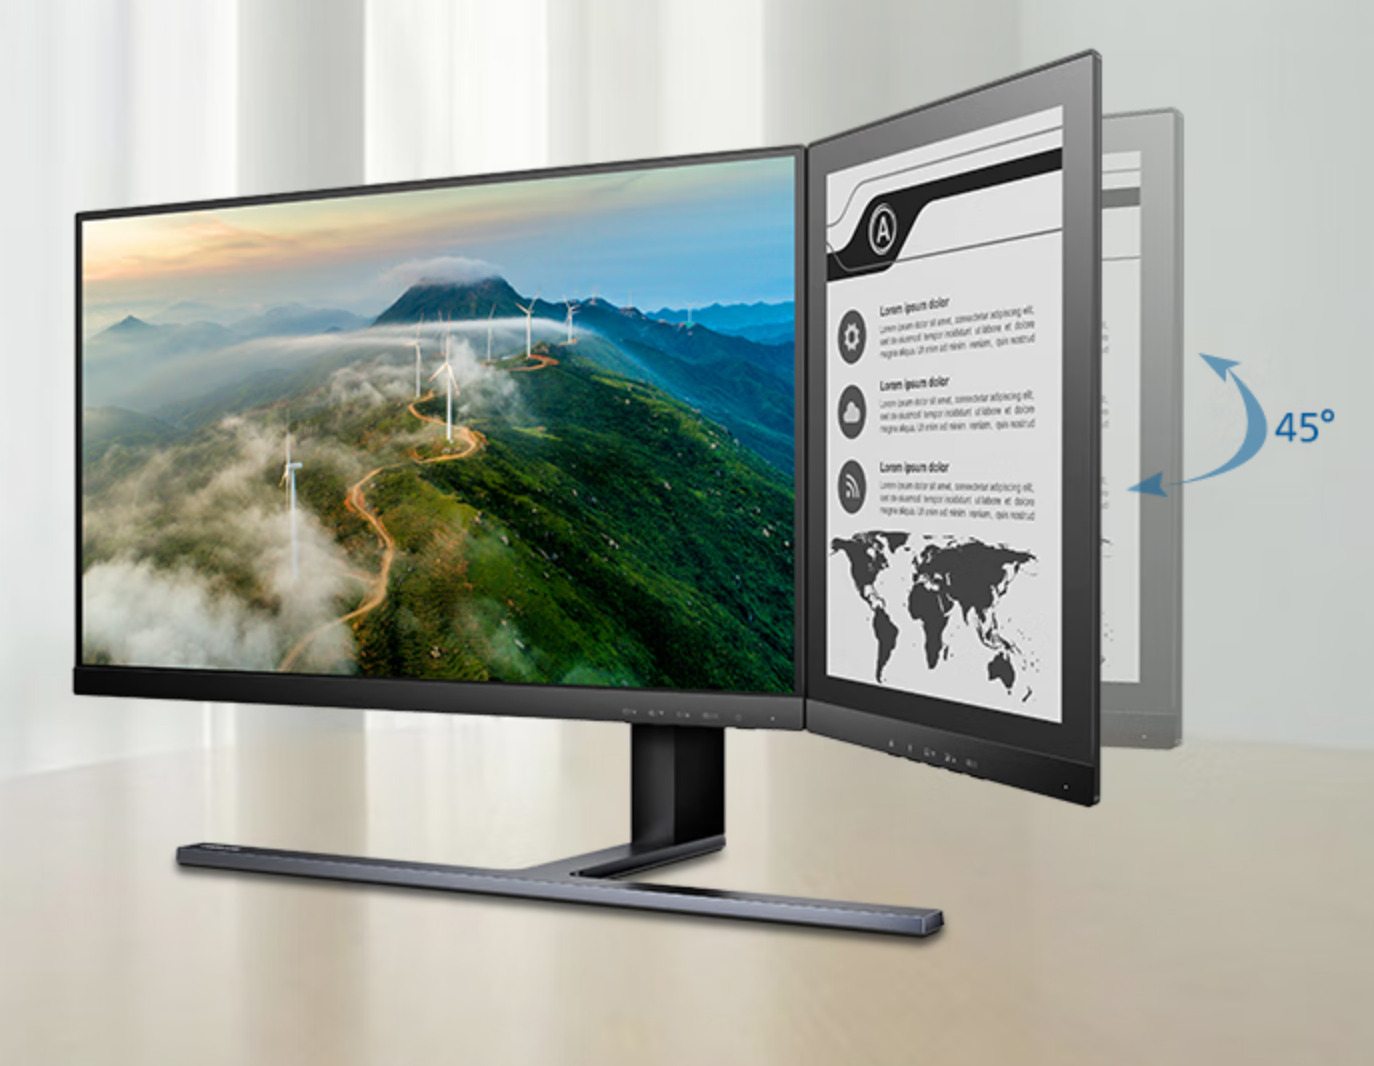 Philips 23 inch IPS Monitor and secondary E INK Screen - Good e-Reader